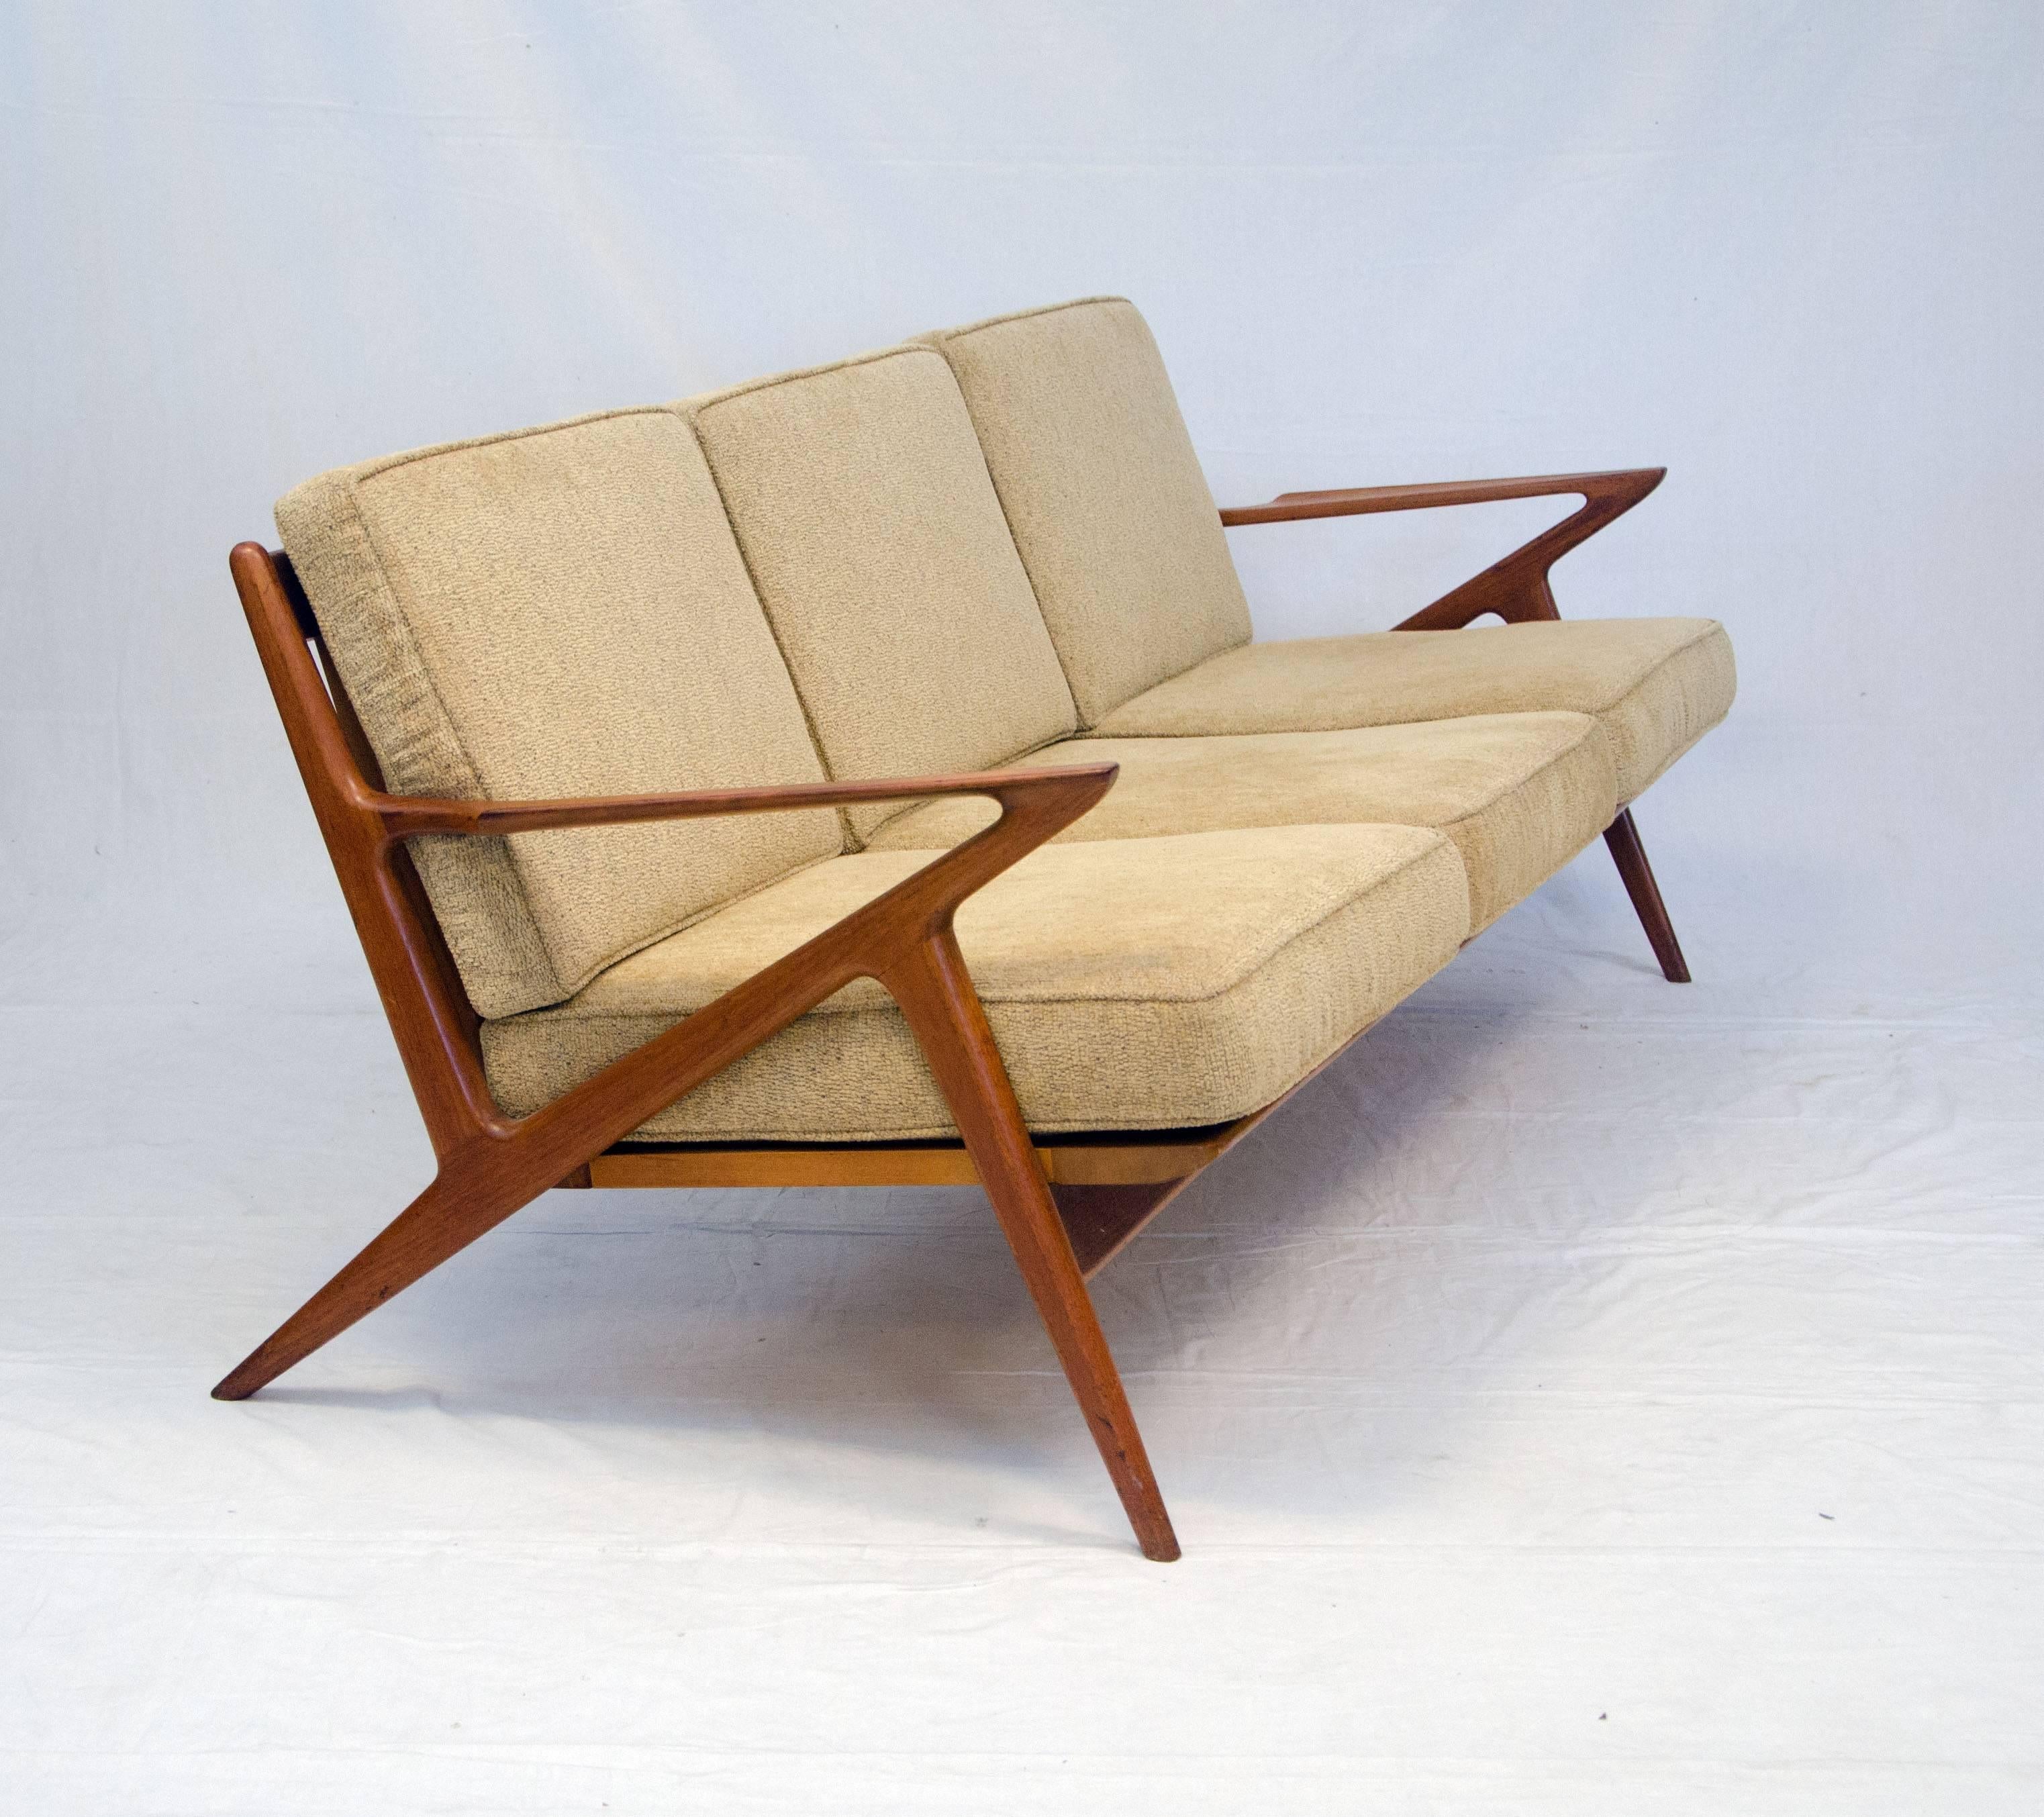 Very nice Mid-Century Danish Modern teak Z sofa manufactured by Selig and designed by Poul Jensen. The strapping that supports the seat cushions is original and in good condition.